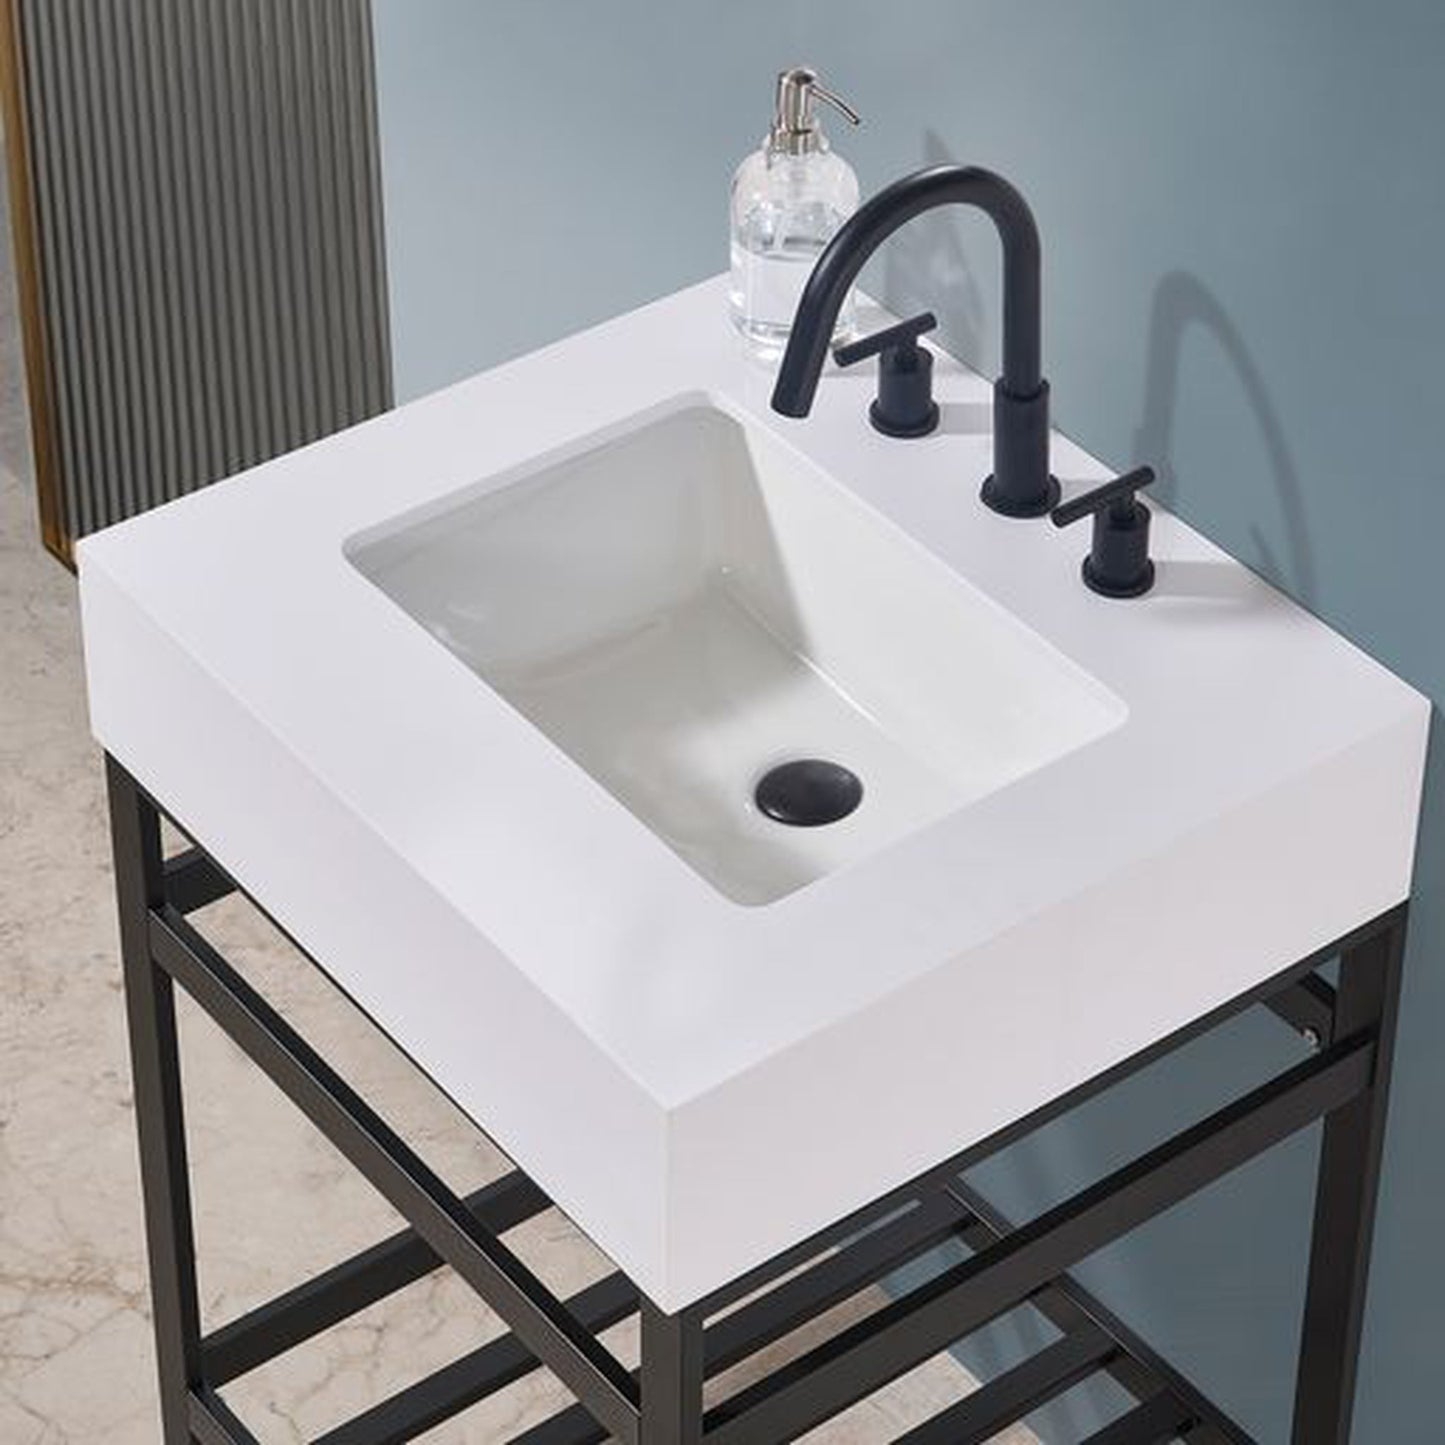 Altair Edolo 24" Matte Black Single Stainless Steel Bathroom Vanity Set Console With Mirror, Snow White Stone Top, Single Rectangular Undermount Ceramic Sink, and Safety Overflow Hole